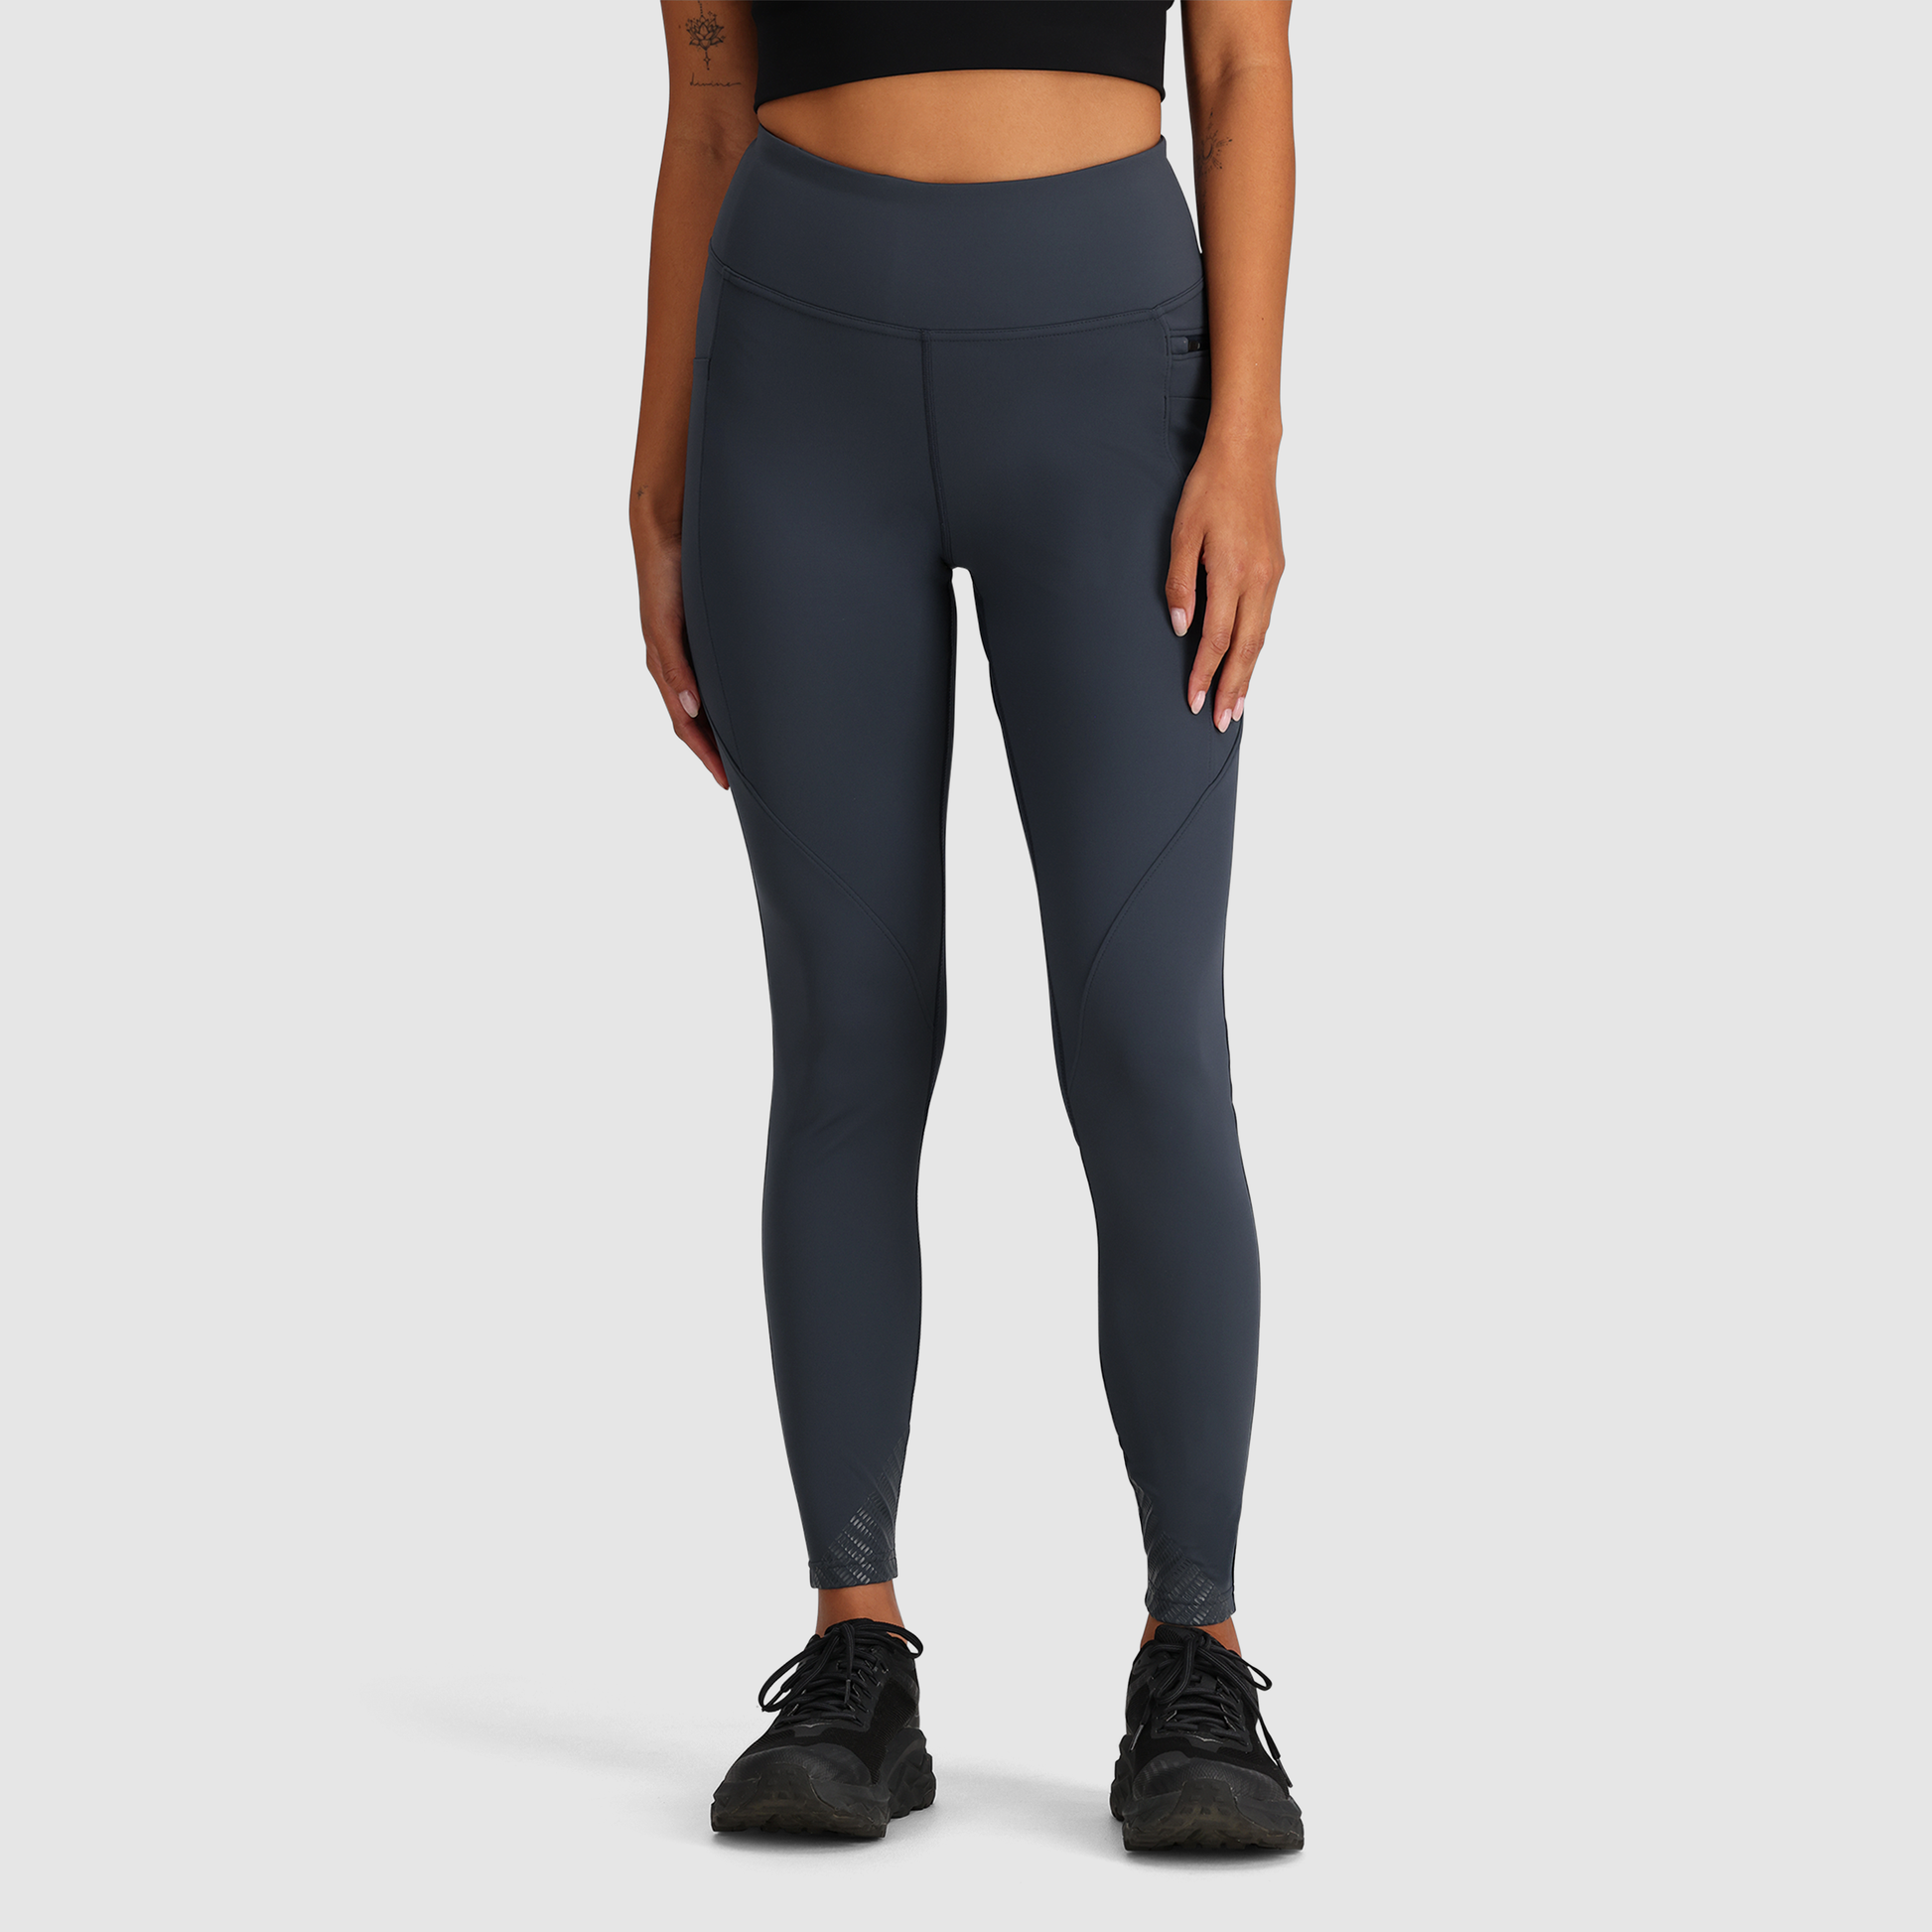 Buy Active Research Women s Compression Pants - Best Leggings for